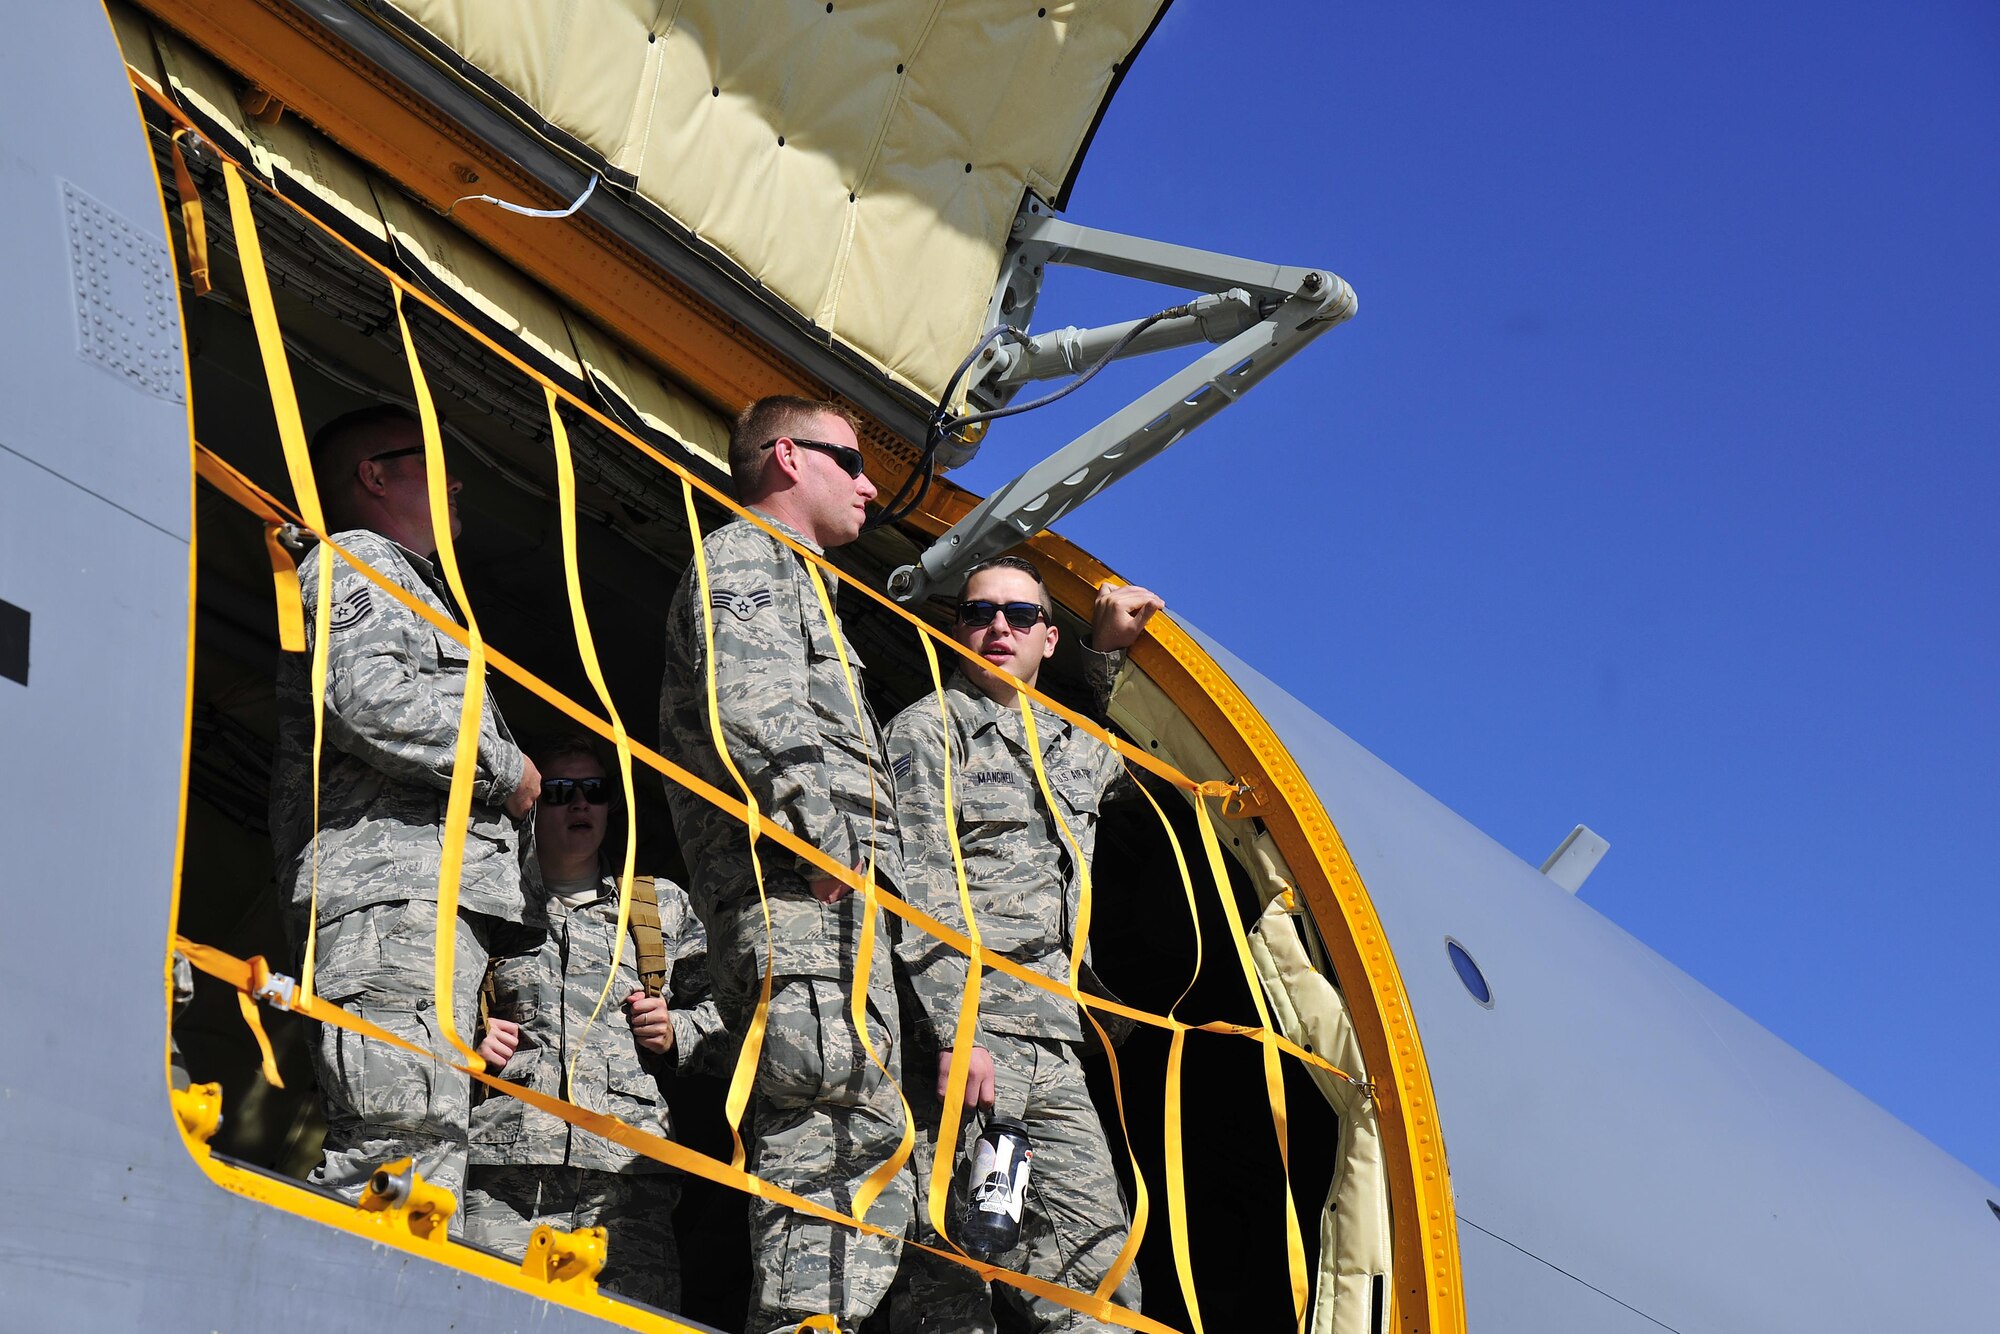 Members of the 113th Wing, D.C. Air National Guard, look out the door of a 459th Air Refueling Wing KC-135 Stratotanker at Joint Base Andrews, Maryland, Sept. 9, 2017.  Aircrews from the 459th ARW picked up the guardsmen at Tyndall Air Force Base, Florida, earlier in the day due to the threat of Hurricane Irma. (U.S. Air Force photo by Tech. Sgt. Brent A. Skeen)